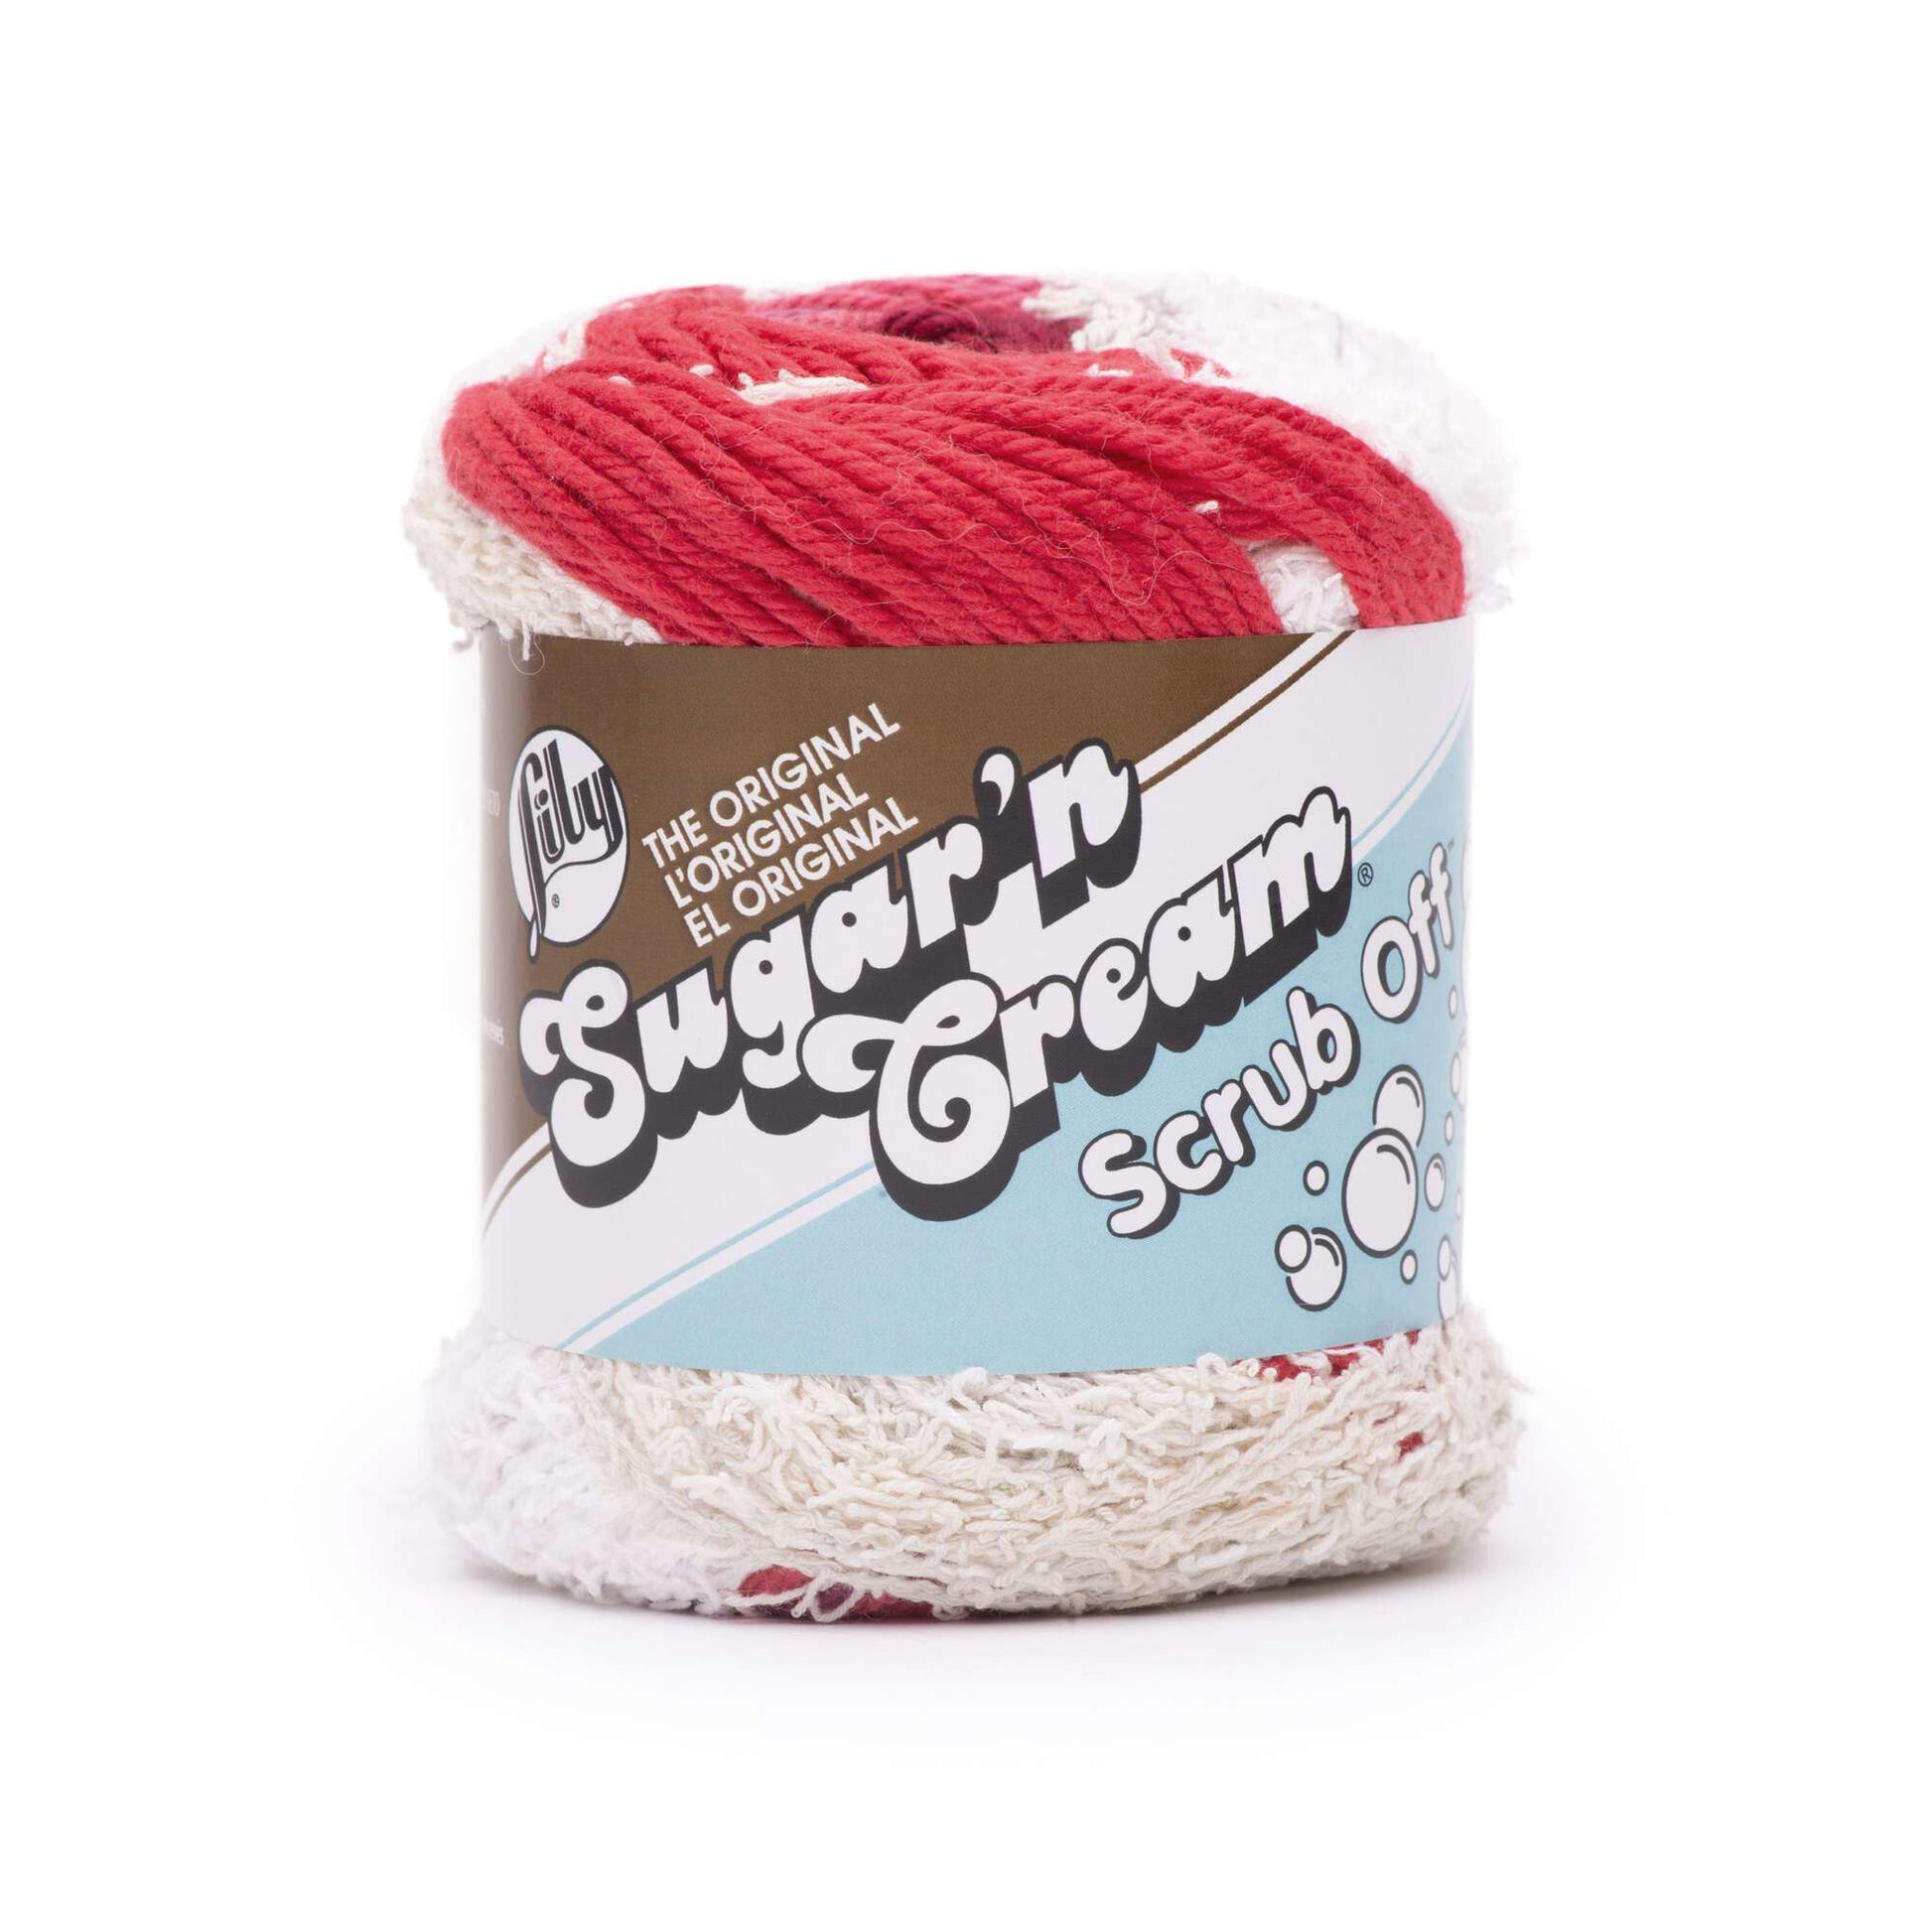 Sugar and Cream Cotton Yarn in Hot Pink Color, Bright Pink Cotton